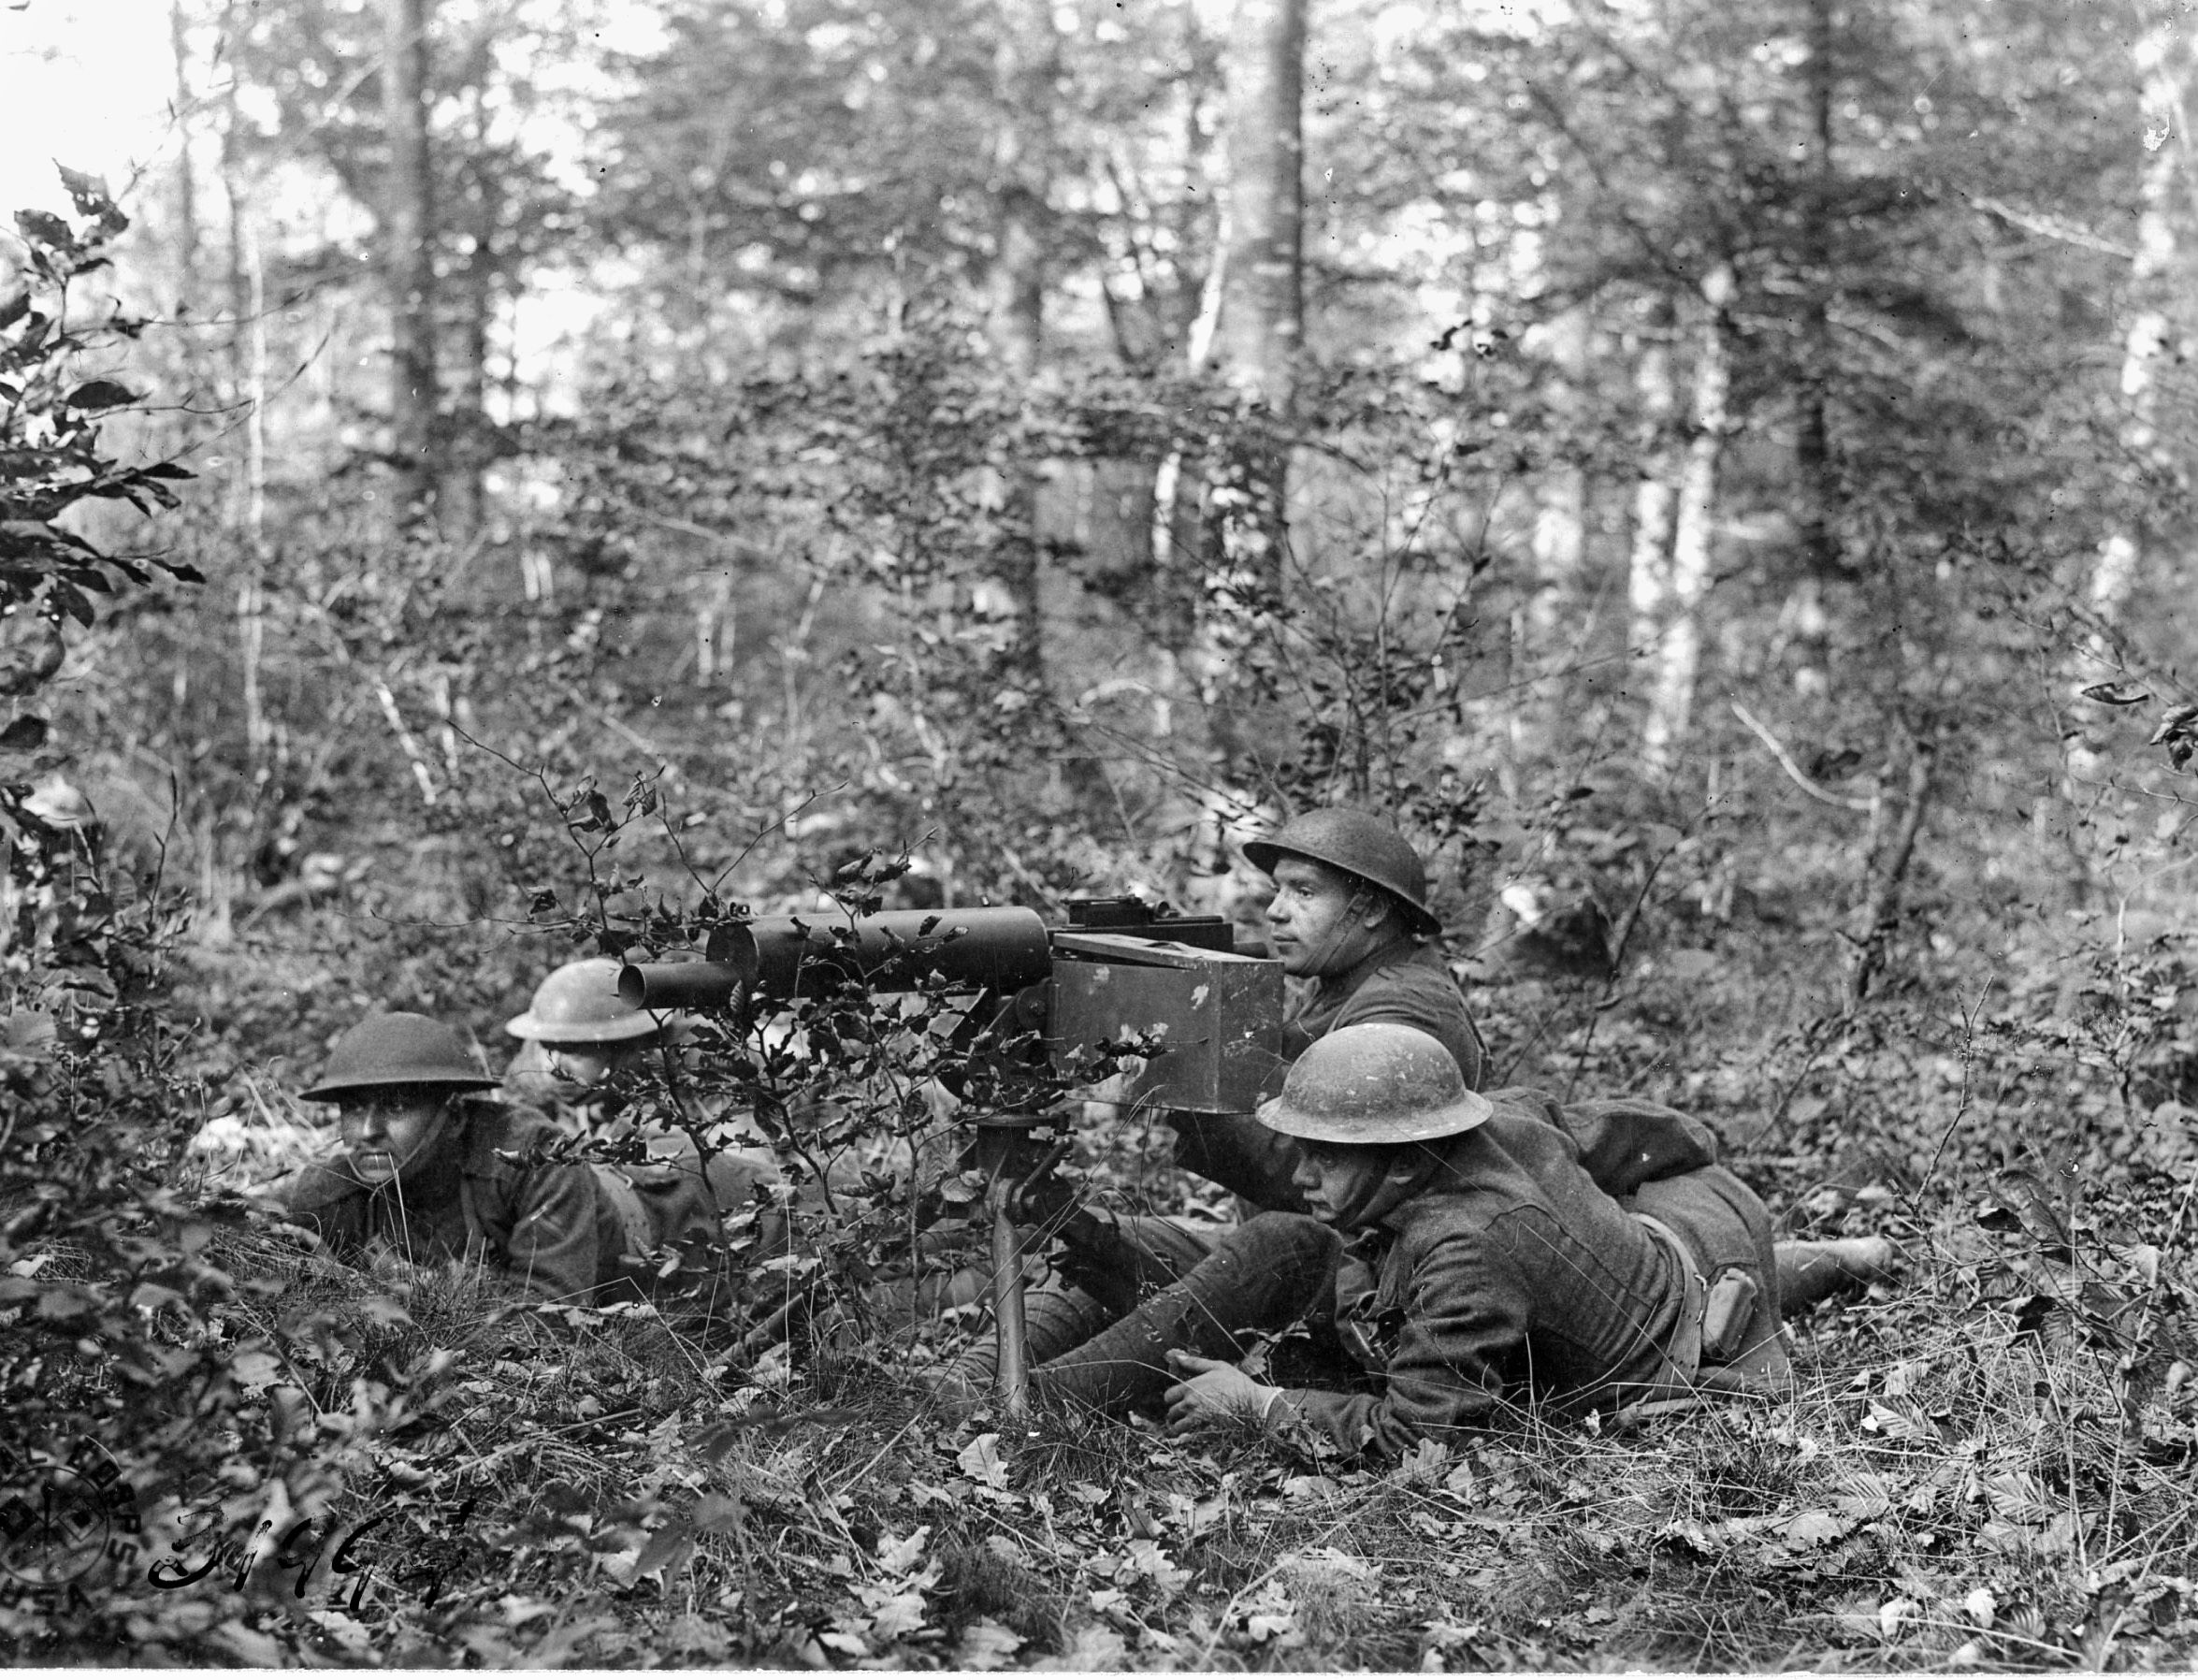 Wary members of the 315th Machine Gun Battalion advance through the woods between La Chalade and Ciaon during the American offensive in the Meuse-Argonne sector. 